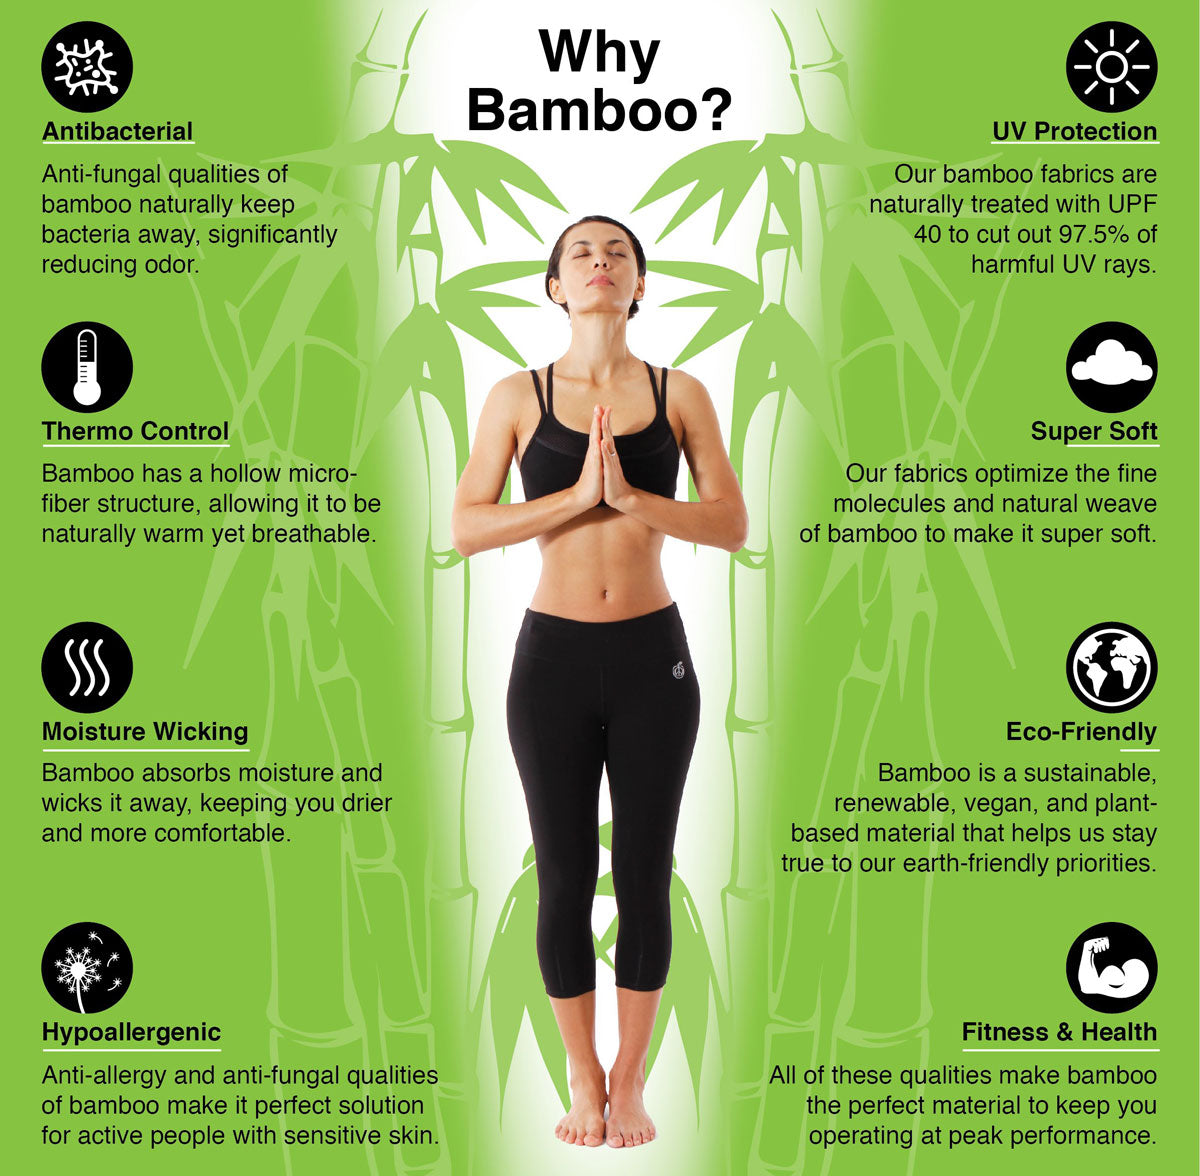 why bamboo? sizing guide: antibacterial, thermo control, moisture wicking, hypoallergenic, uv protection, super soft, eco-friendly, fitness & health